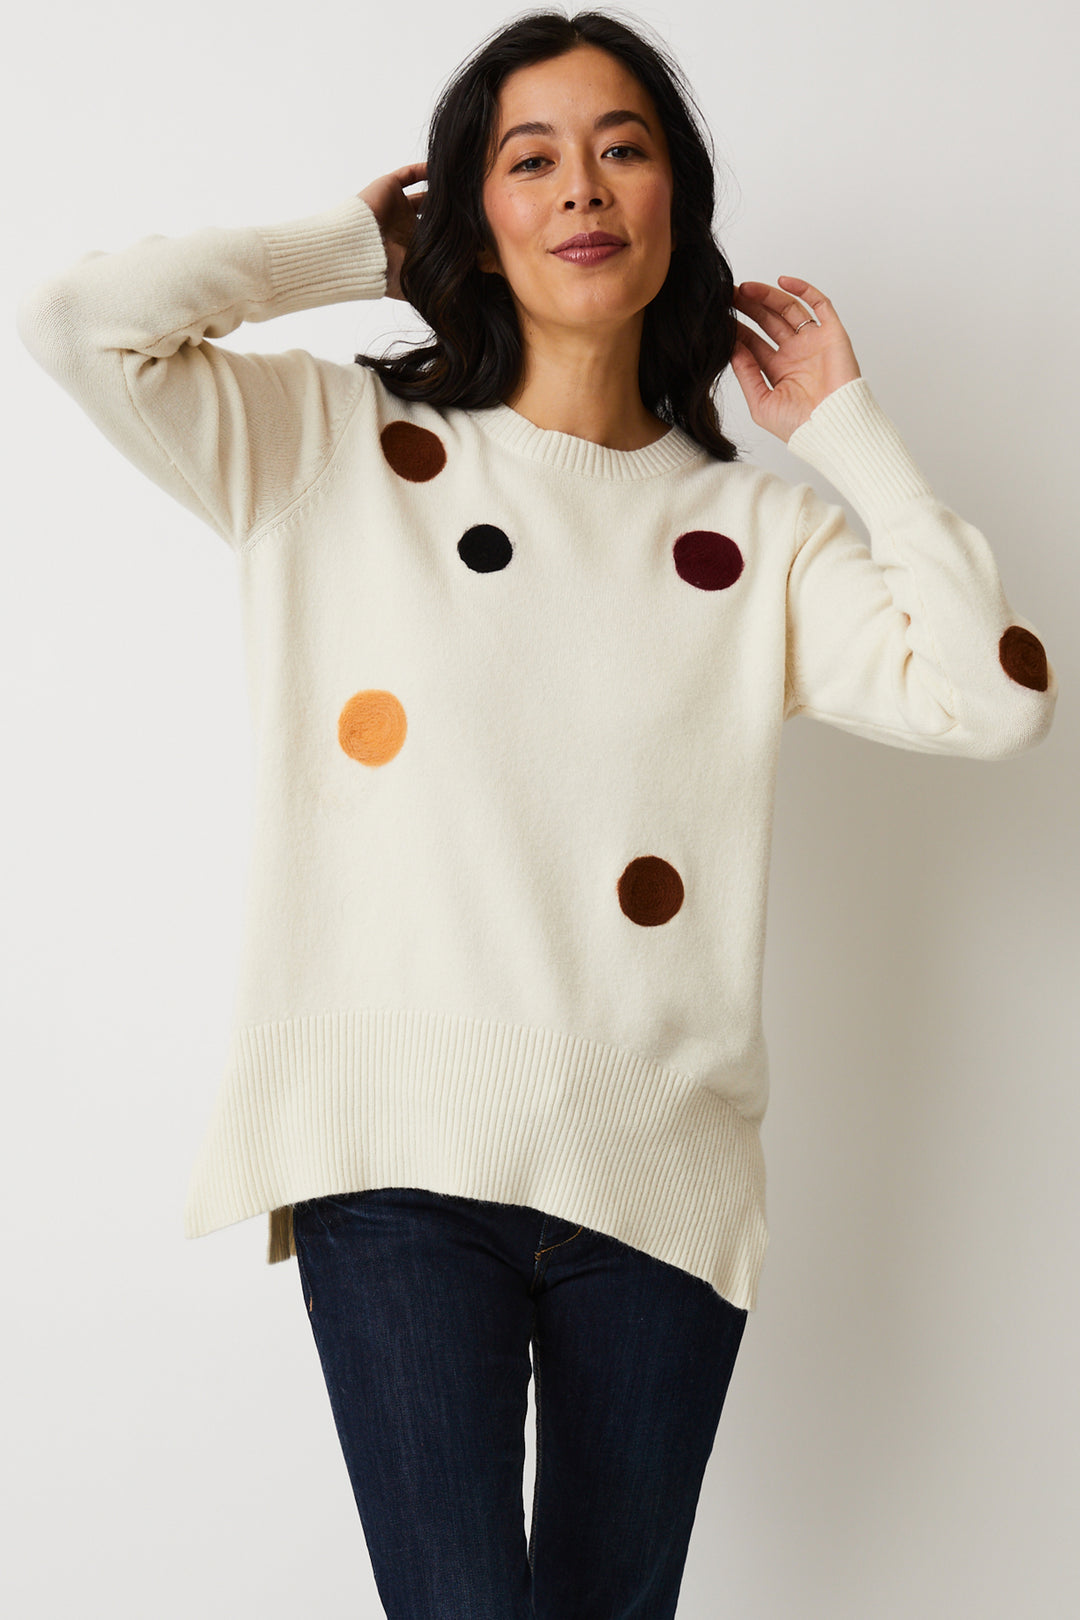 Cutely scattered polka dots and a lower bottom seam combine with full length sleeves and a light, relaxed fit for an eye-catching look. 